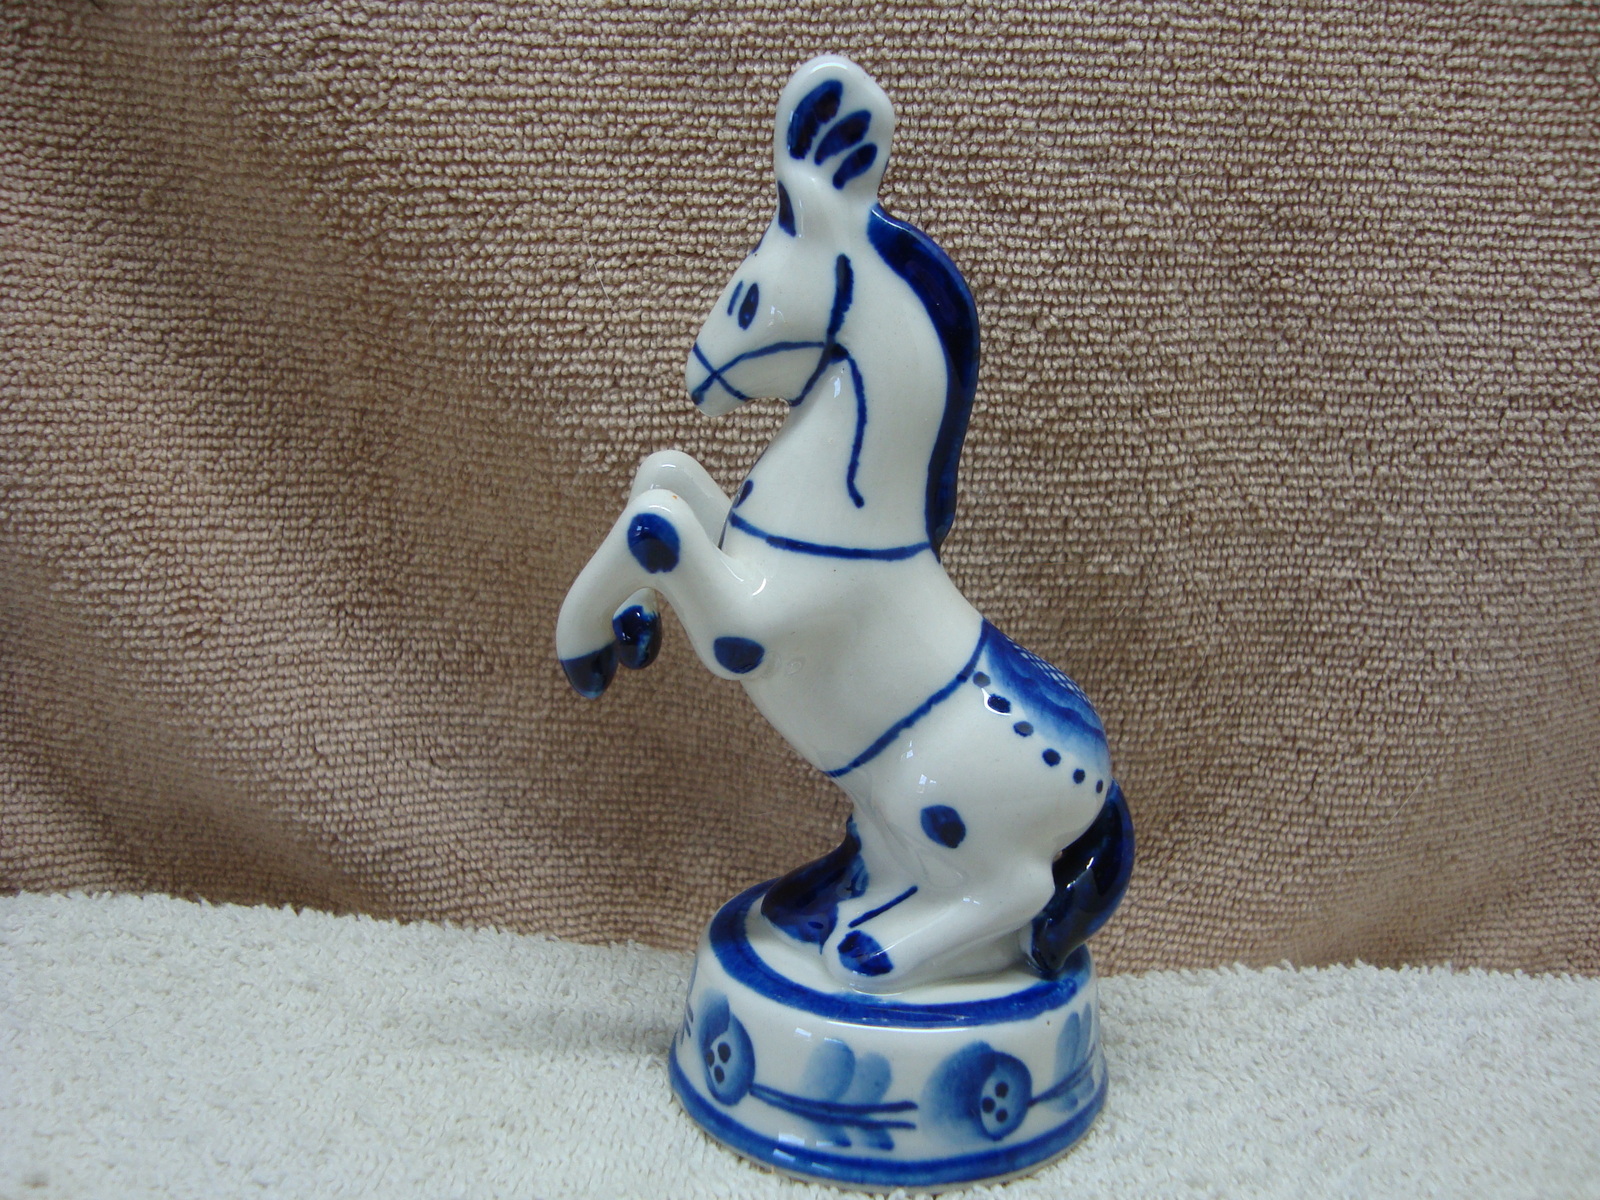 Primary image for Gzhel Porcelain blue & white circus horse figurine made in russia.